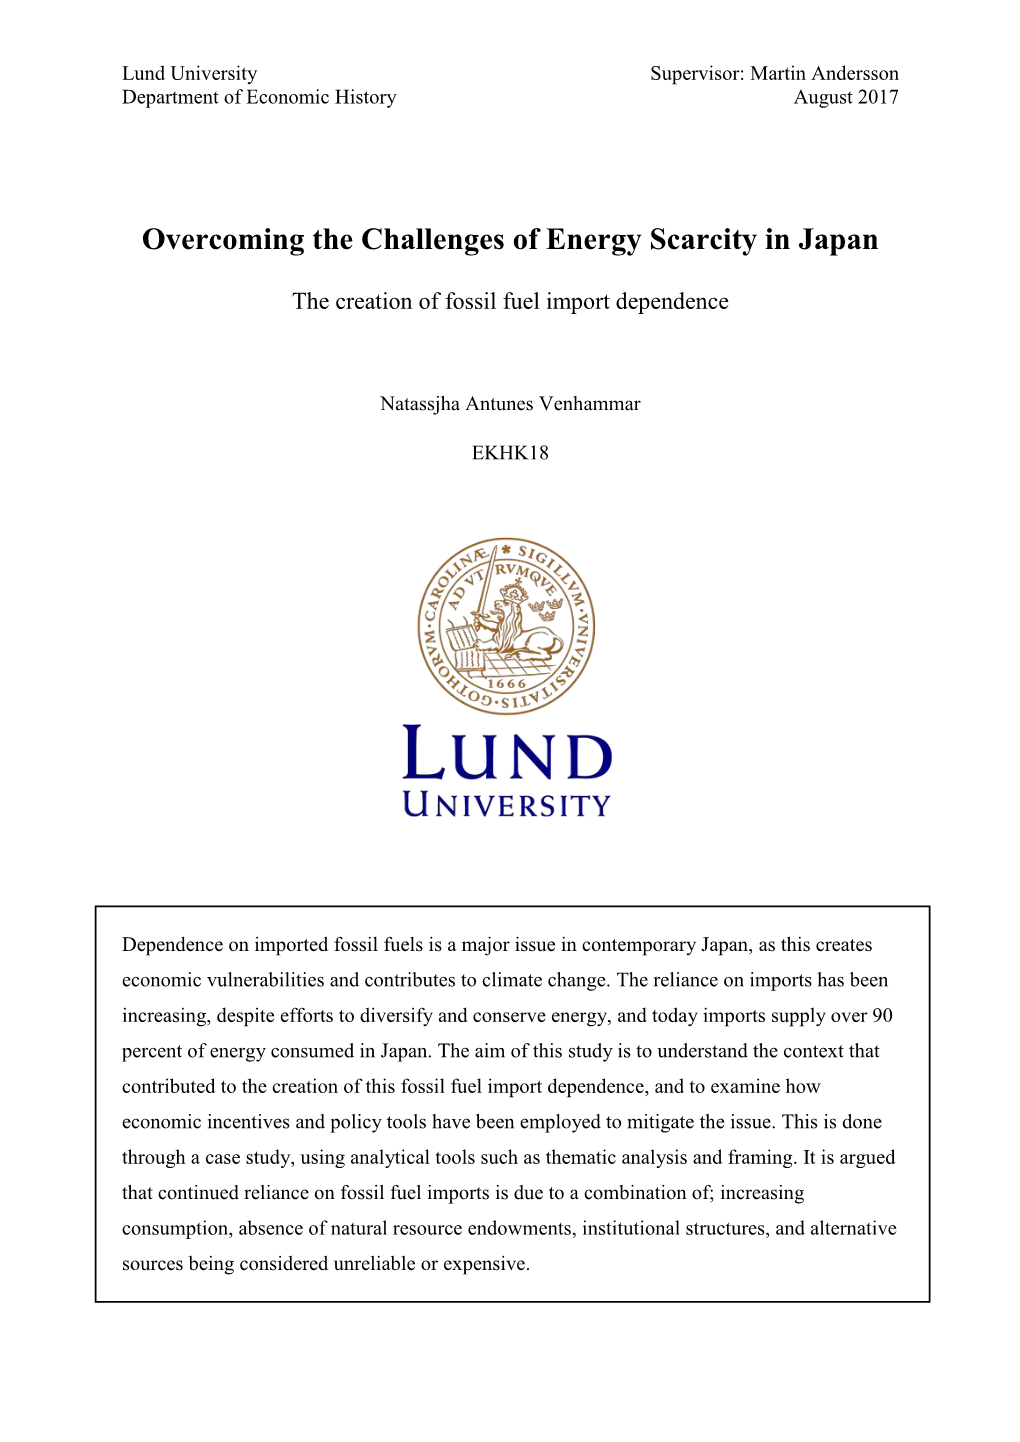 Overcoming the Challenges of Energy Scarcity in Japan